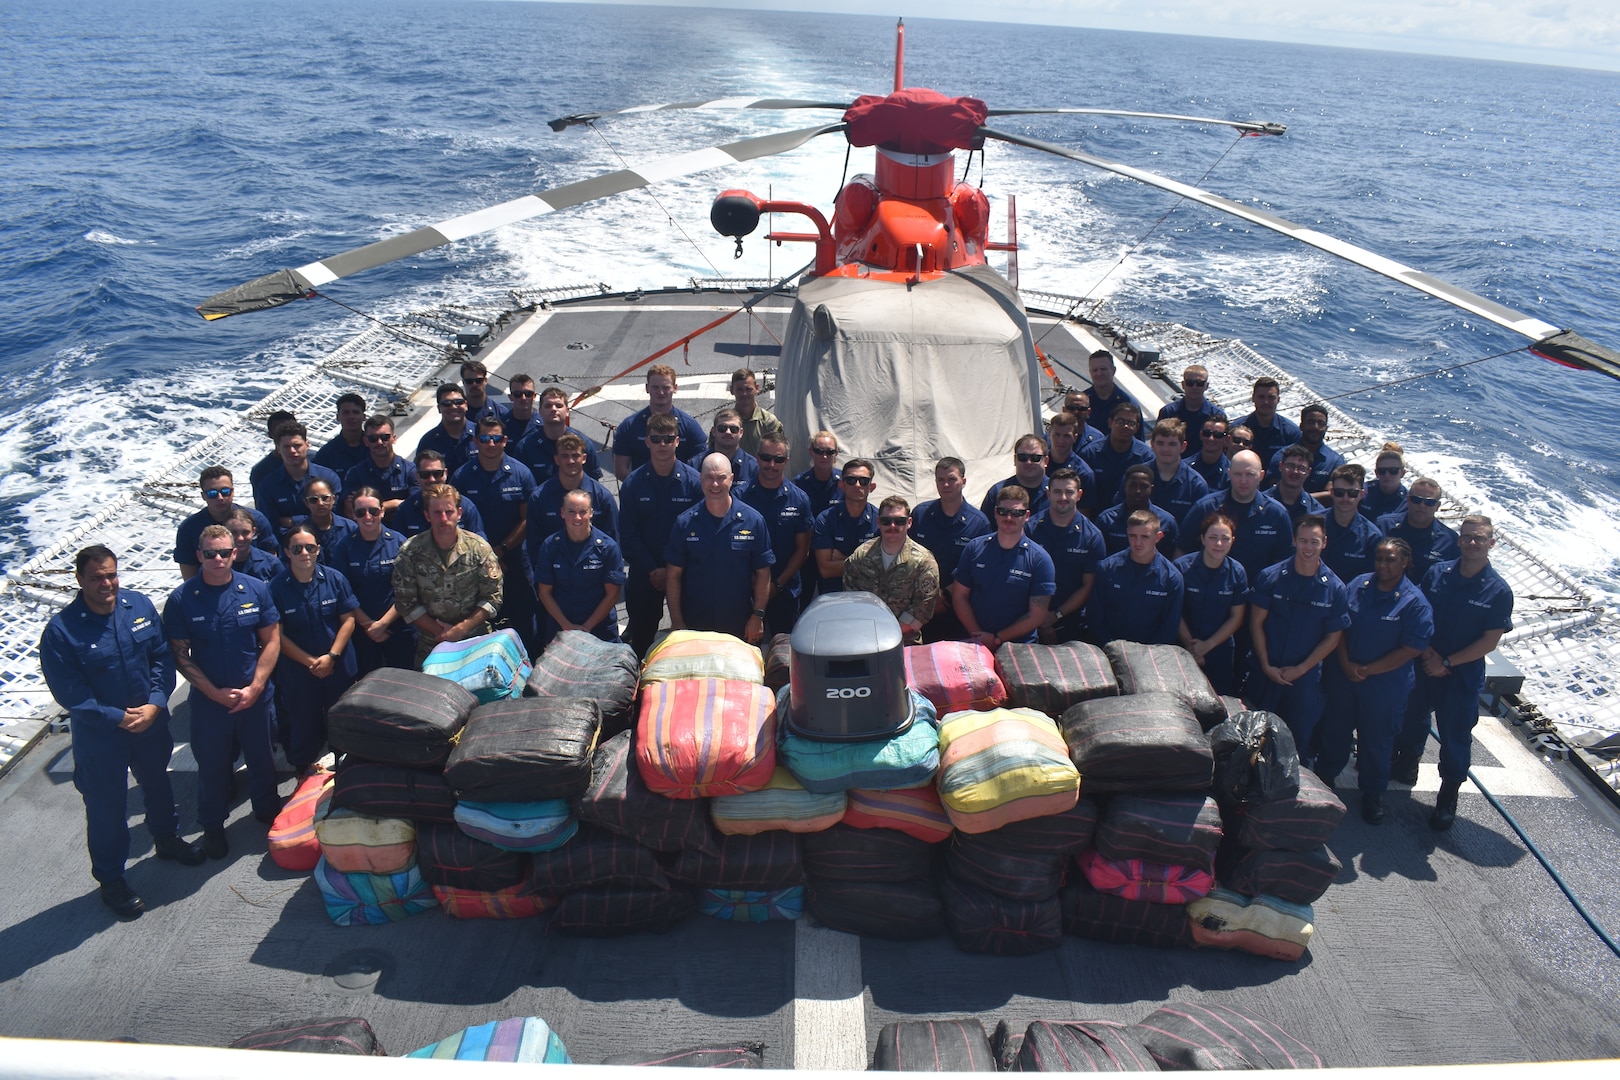 Coast Guard Cutter Resolute crew members take a group photo around $6.2 million worth of marijuana seized during an interdiction on the Eastern Pacific Ocean, Dec. 10, 2023. The Resolute is homeported in St. Petersburg, Florida, and was deployed to the Eastern Pacific Ocean conducting counter narcotics operations in support of Joint Interagency Task Force South.